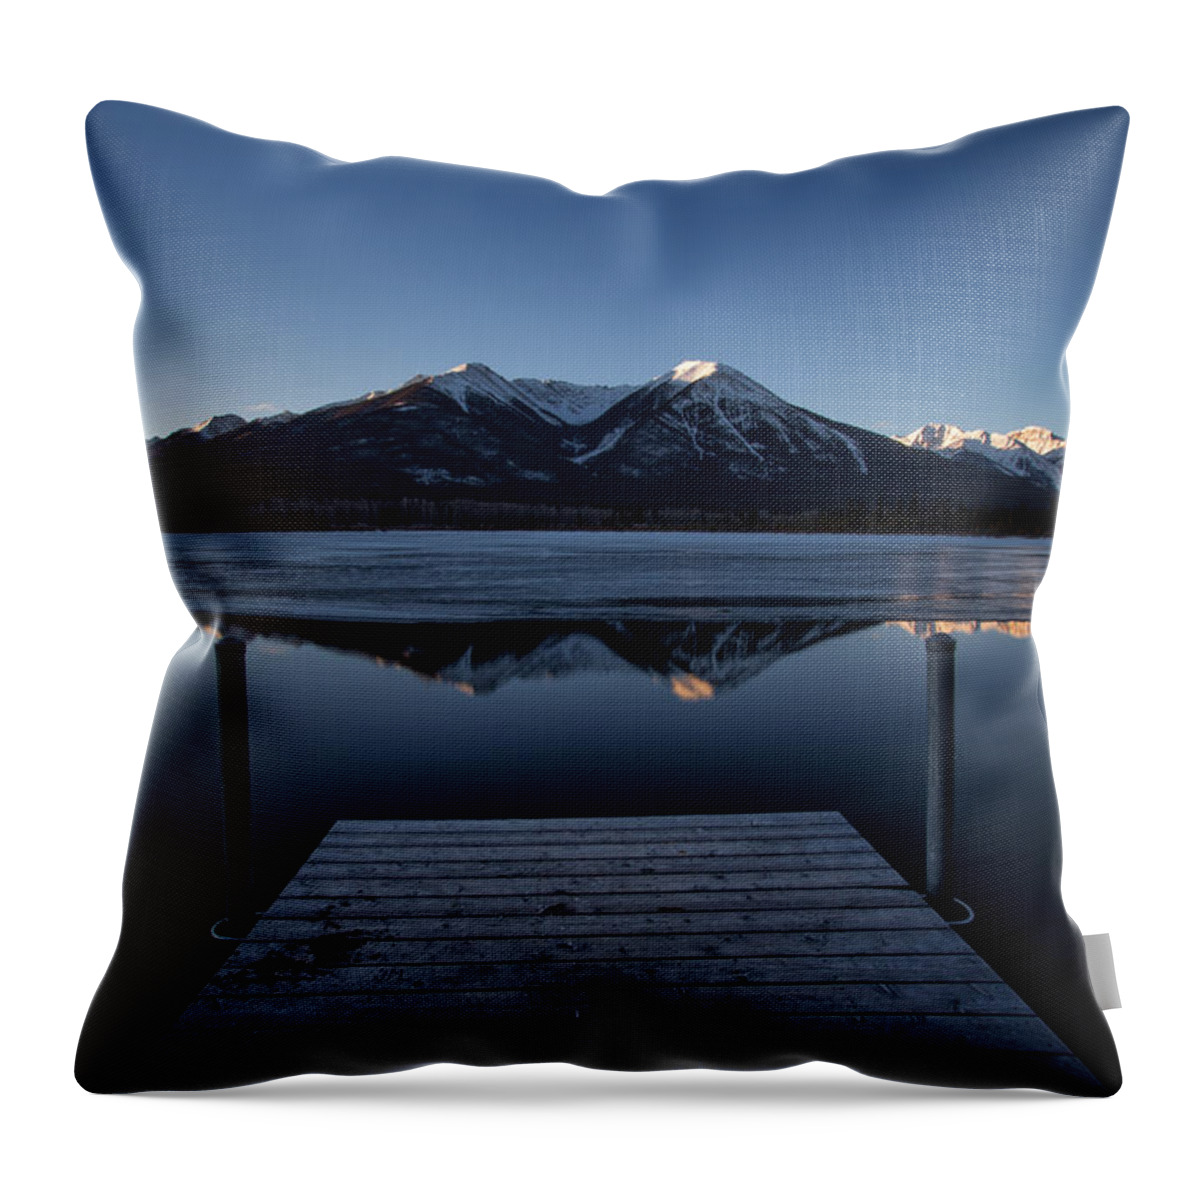 Lakes Throw Pillow featuring the photograph Vermillion lakes at dawn by Celine Pollard